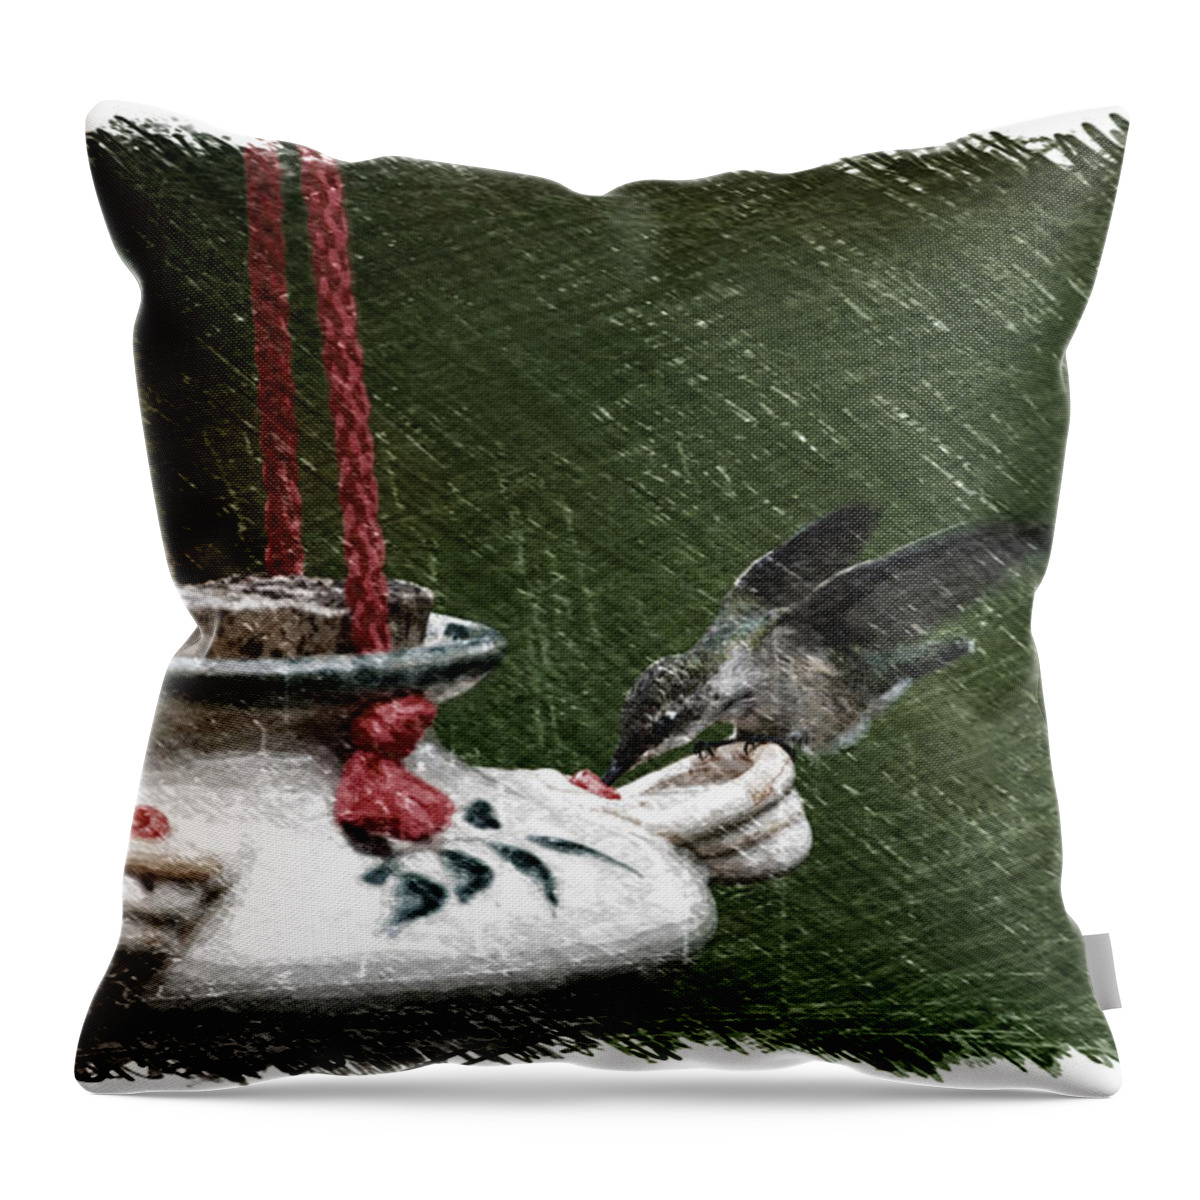 Hummingbird Throw Pillow featuring the mixed media Hummingbird At The Feeder PA 02 by Thomas Woolworth